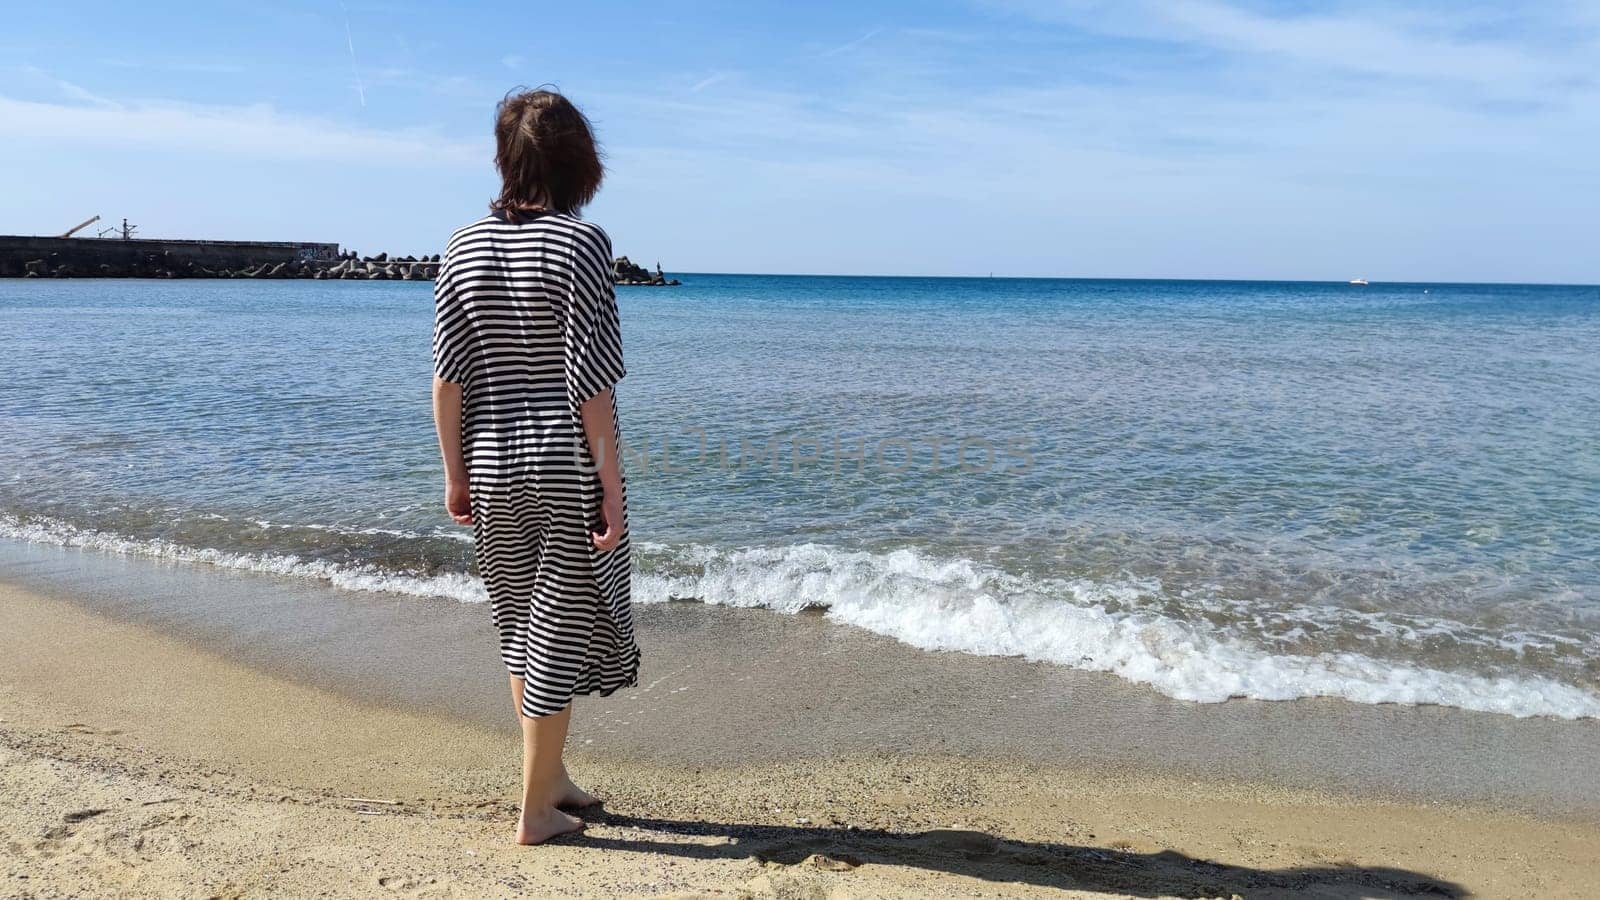 Teenage girl in a striped dress on the seashore on a sunny day, rear view by Annado